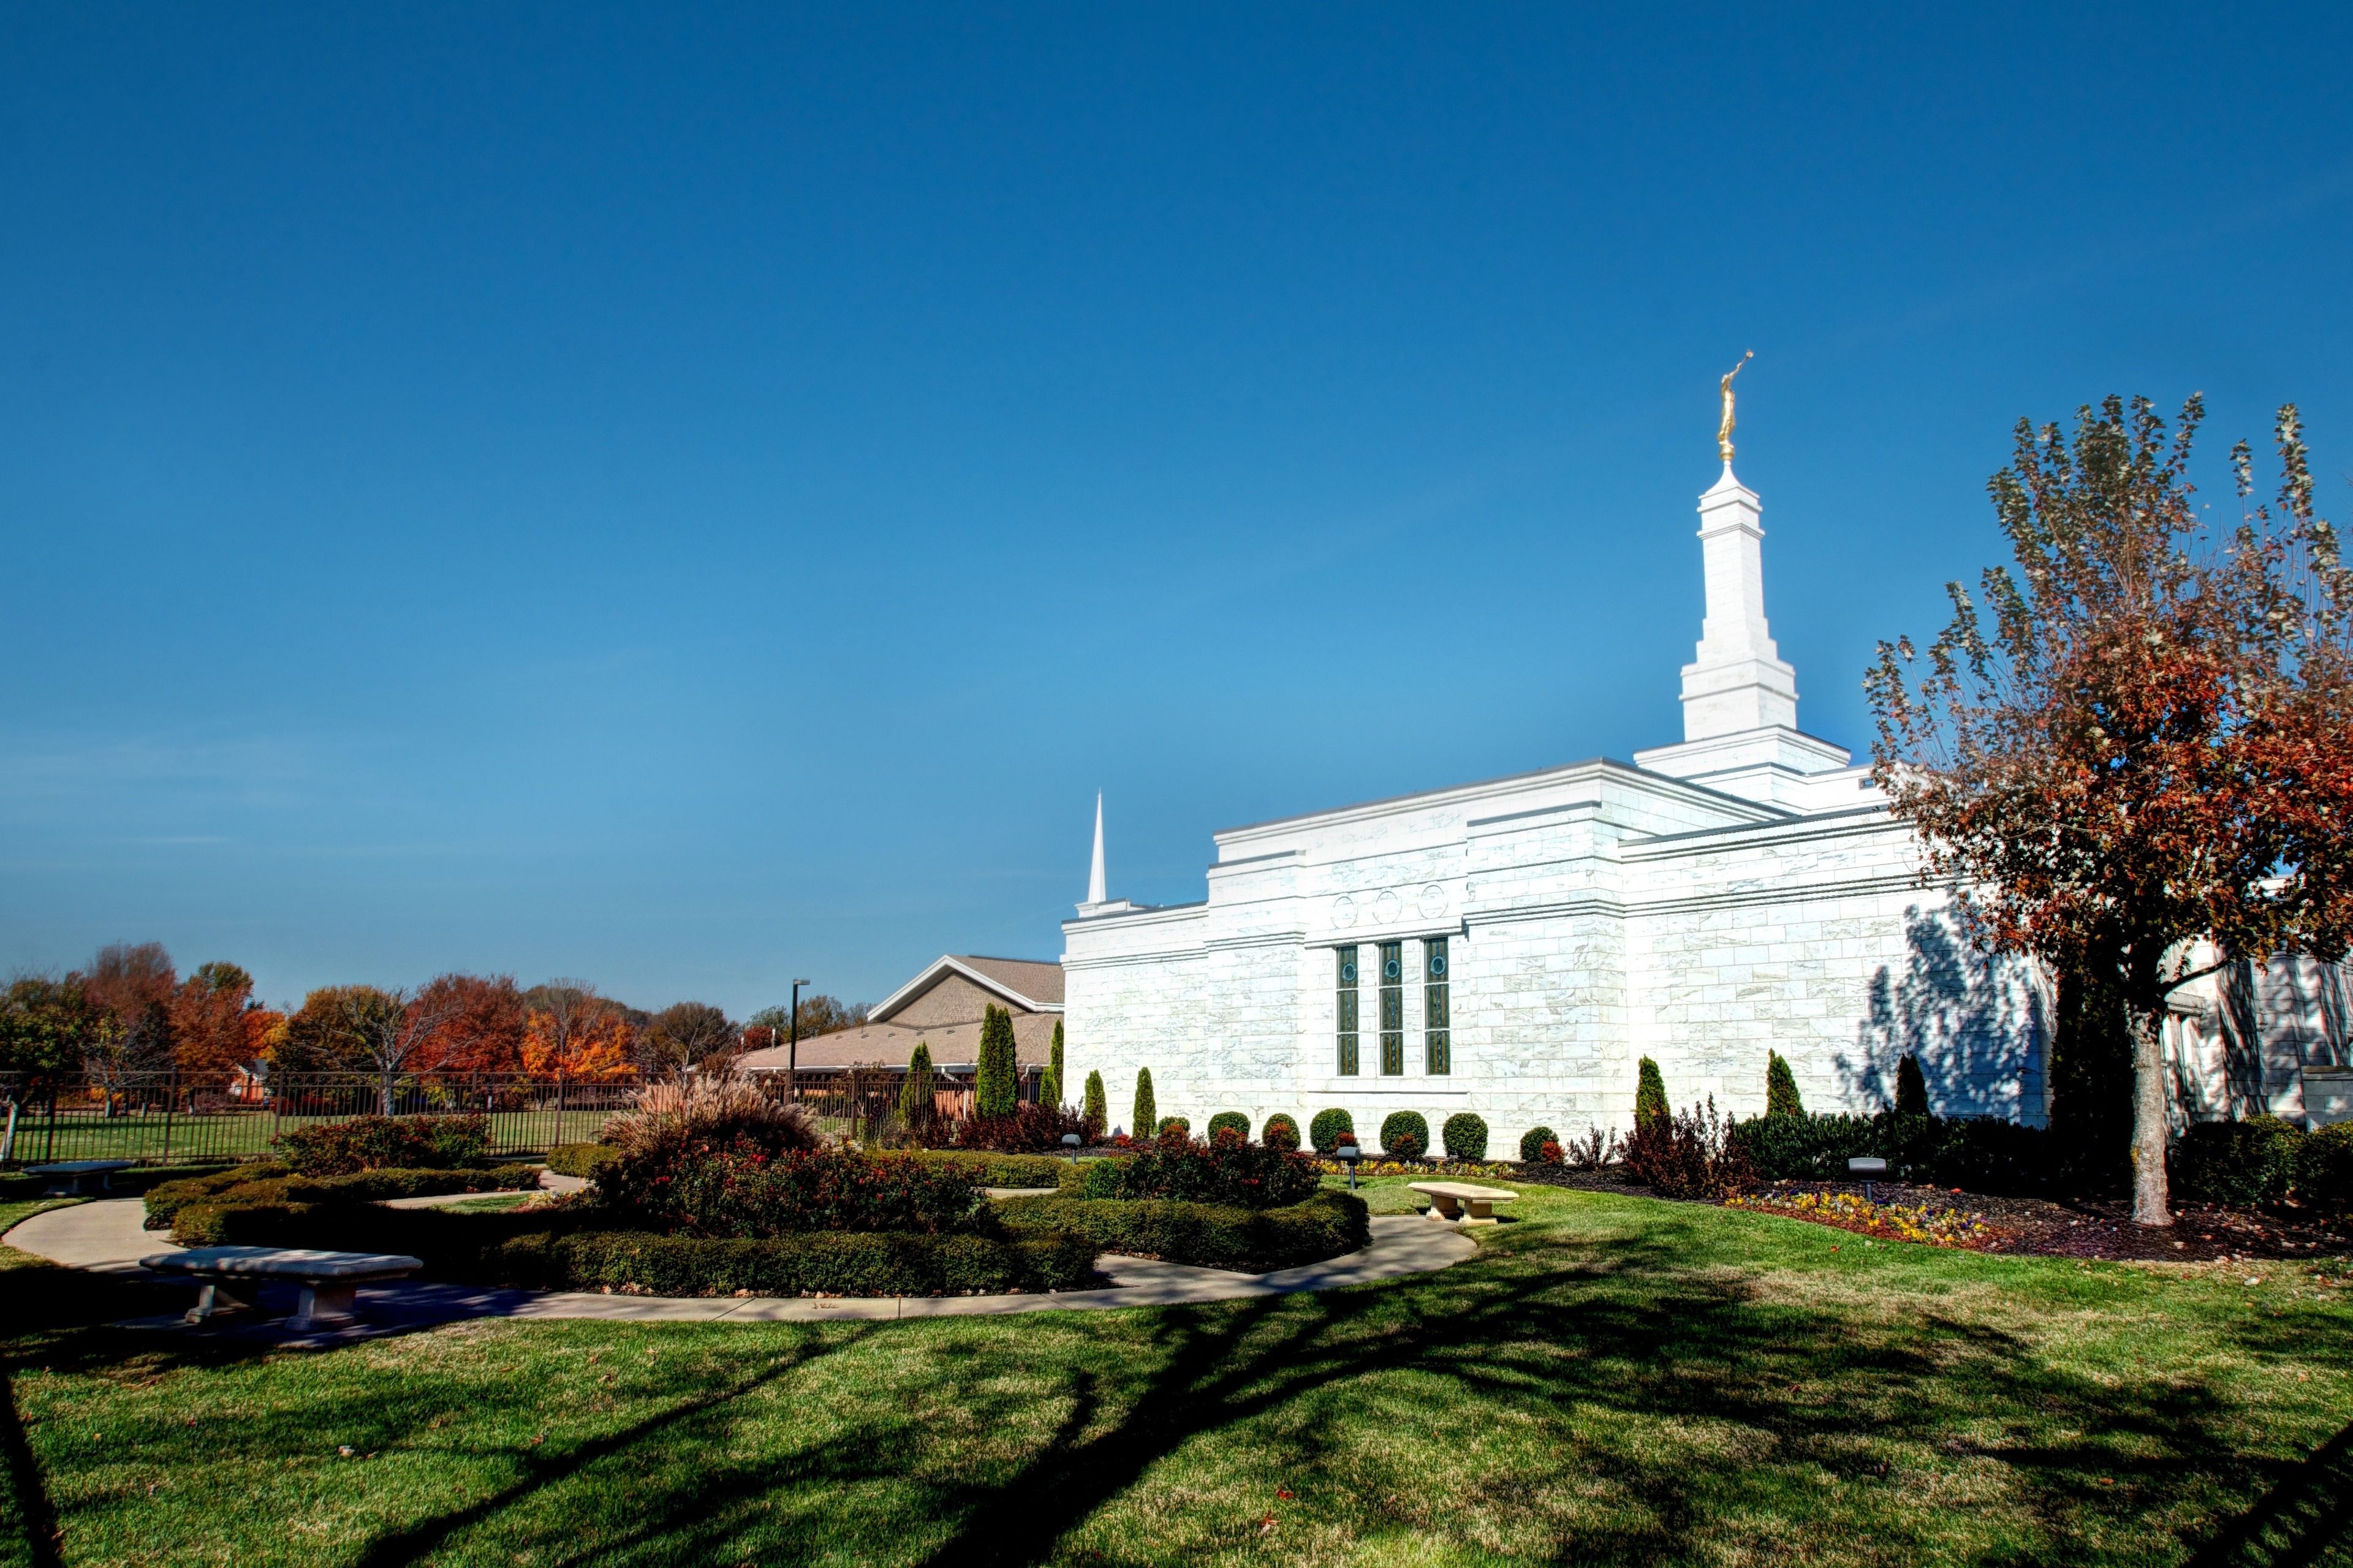 The Nashville Tennessee Temple side view, including scenery.